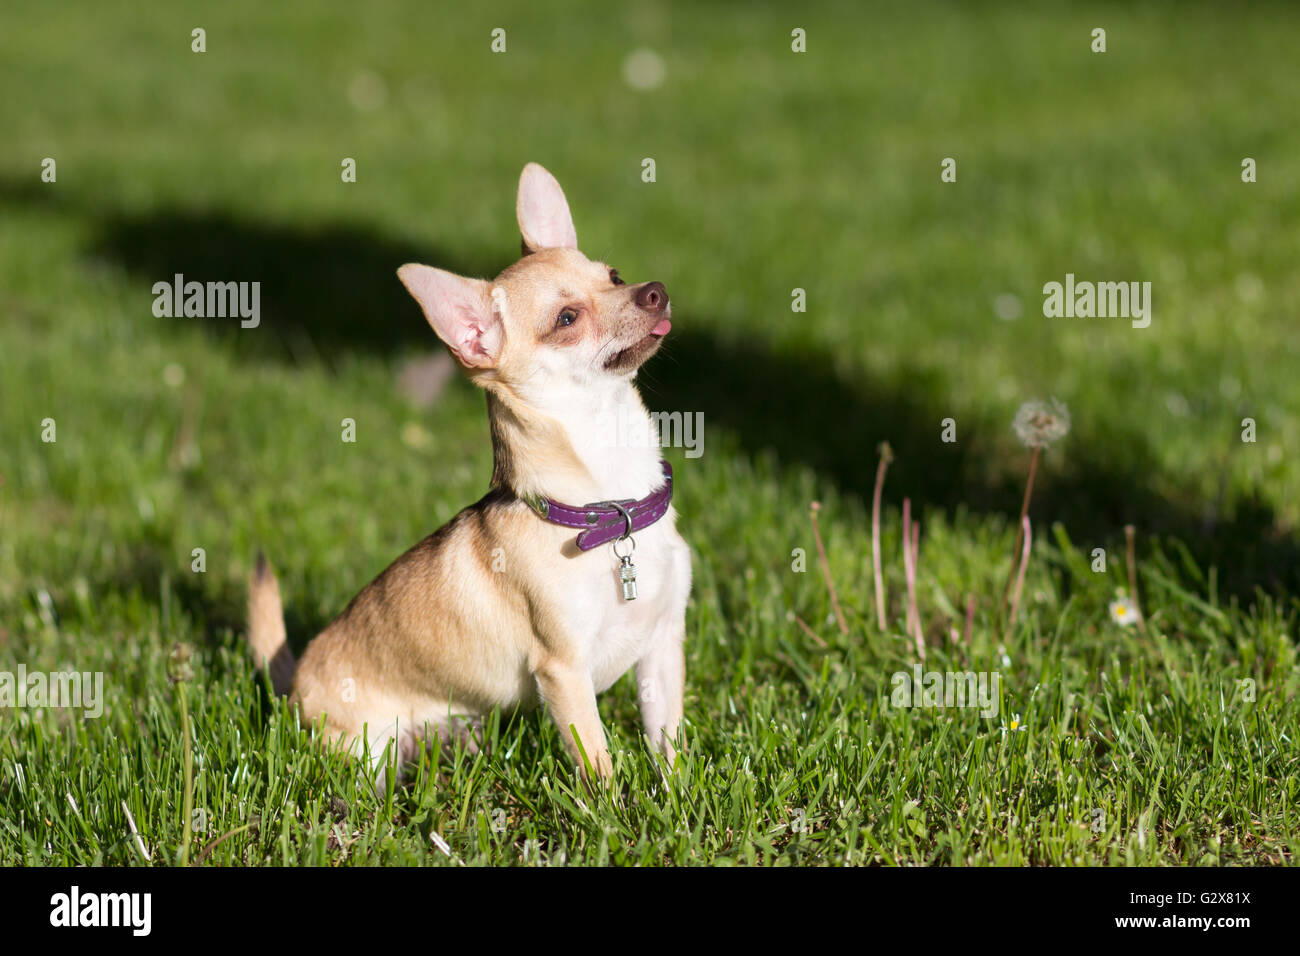 Chihuahua dog looking up grass field Banque D'Images